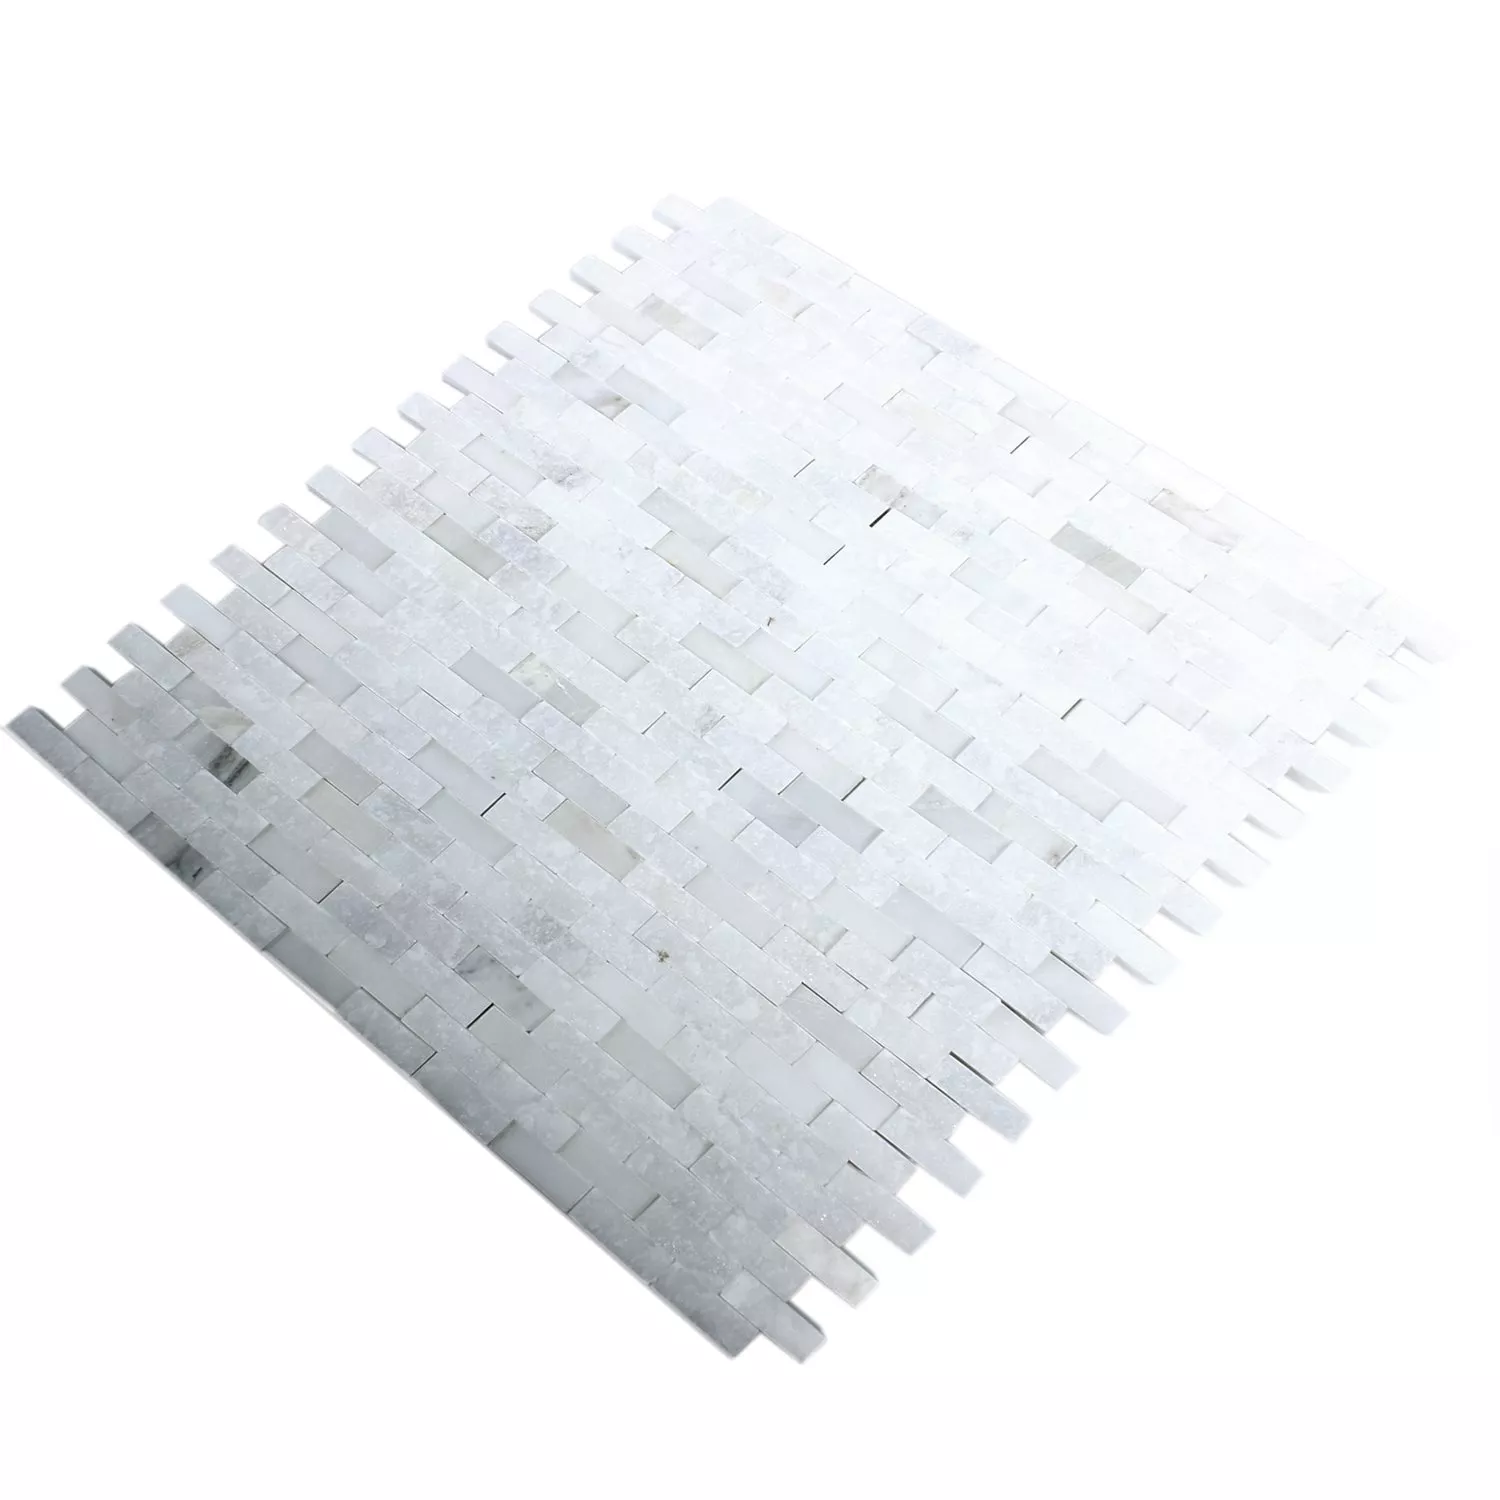 Sample Mosaic Tiles Marble Sirocco White 3D